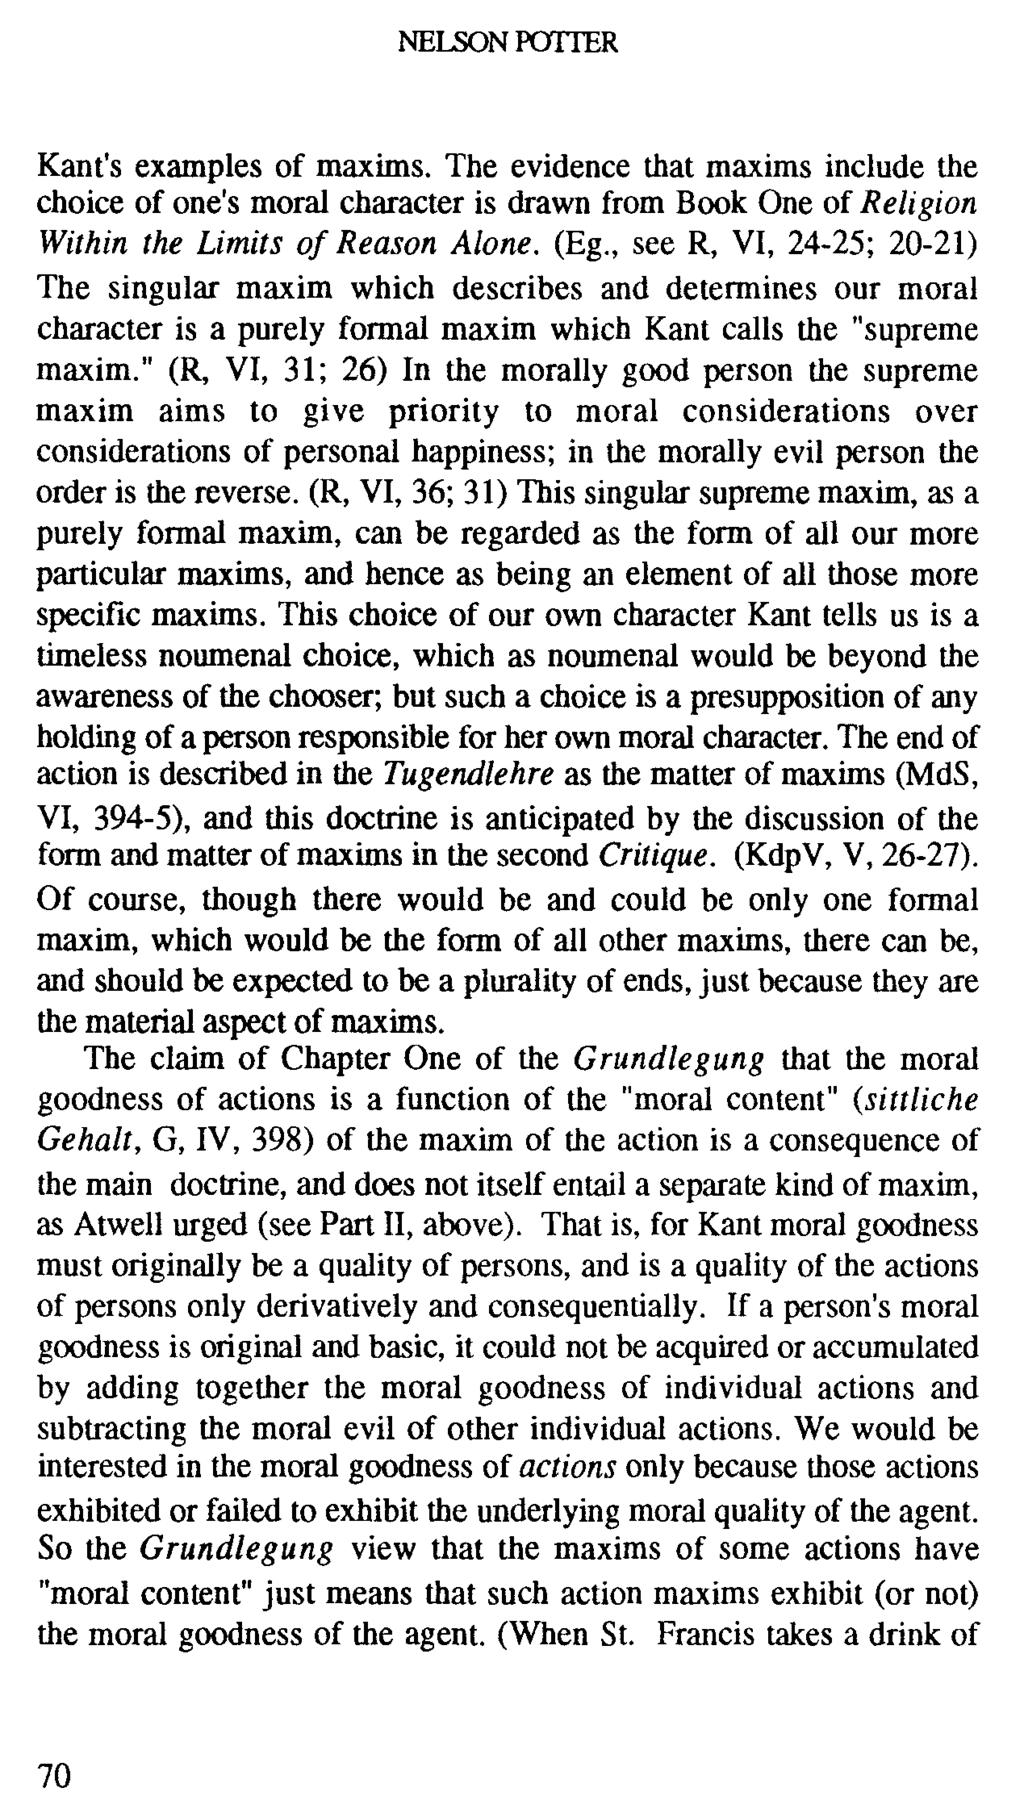 NELSON POTIER Kant's examples of maxims. The evidence that maxims include the choice of one's moral character is drawn from Book One of Religion Within the Limits of Reason Alone. (Eg.